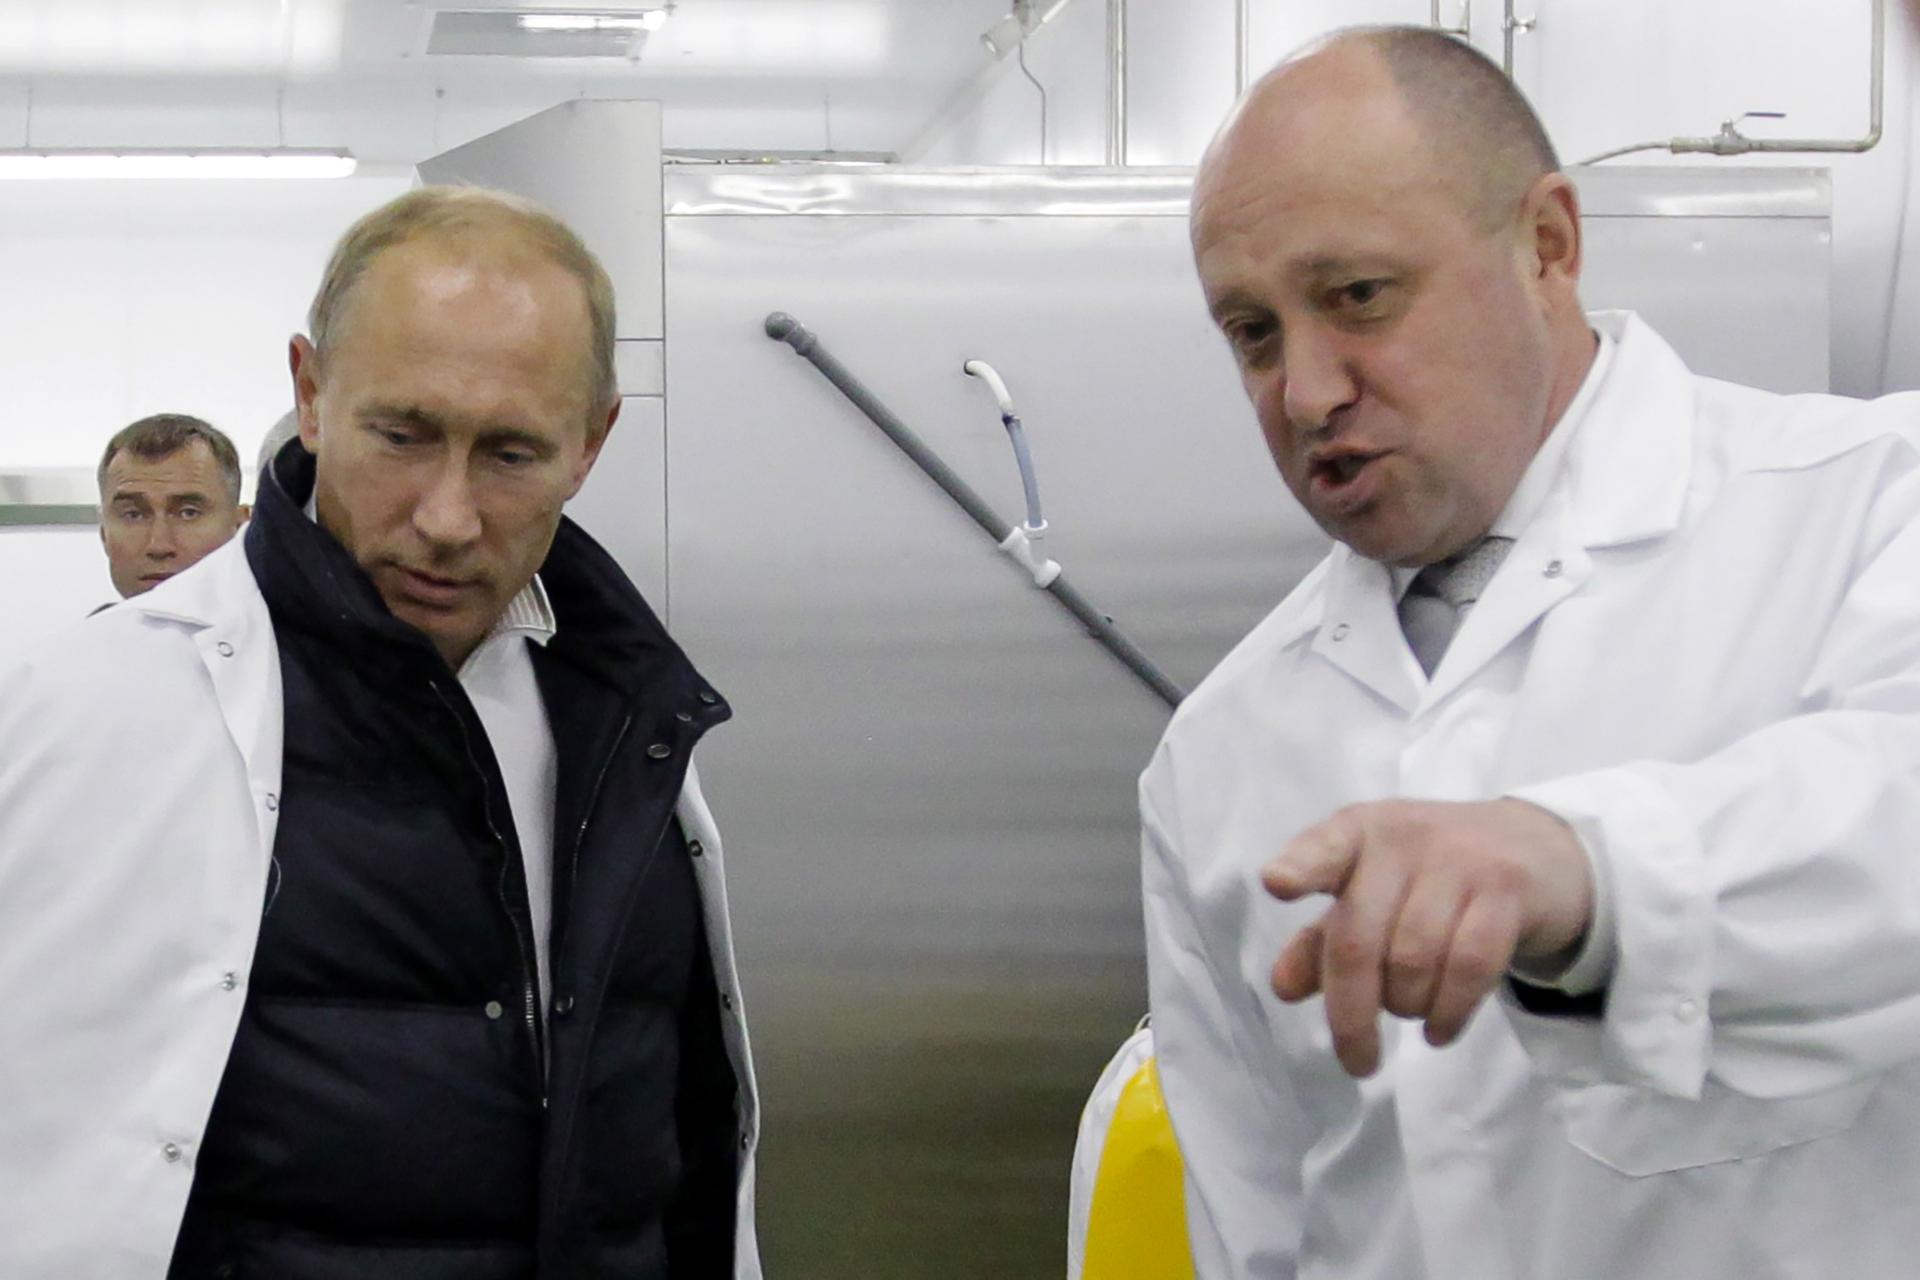 Russian President Vladimir Putin, left, and Wagner Chief Yevgeny Prizoghin. Known as “Putin’s Chef” for his lucrative catering contracts secured for the Kremlin, Prigozhin has played a major and sometimes central role in world events over the past decade. (Alexey Druzhinn / Contributor via Getty Images)